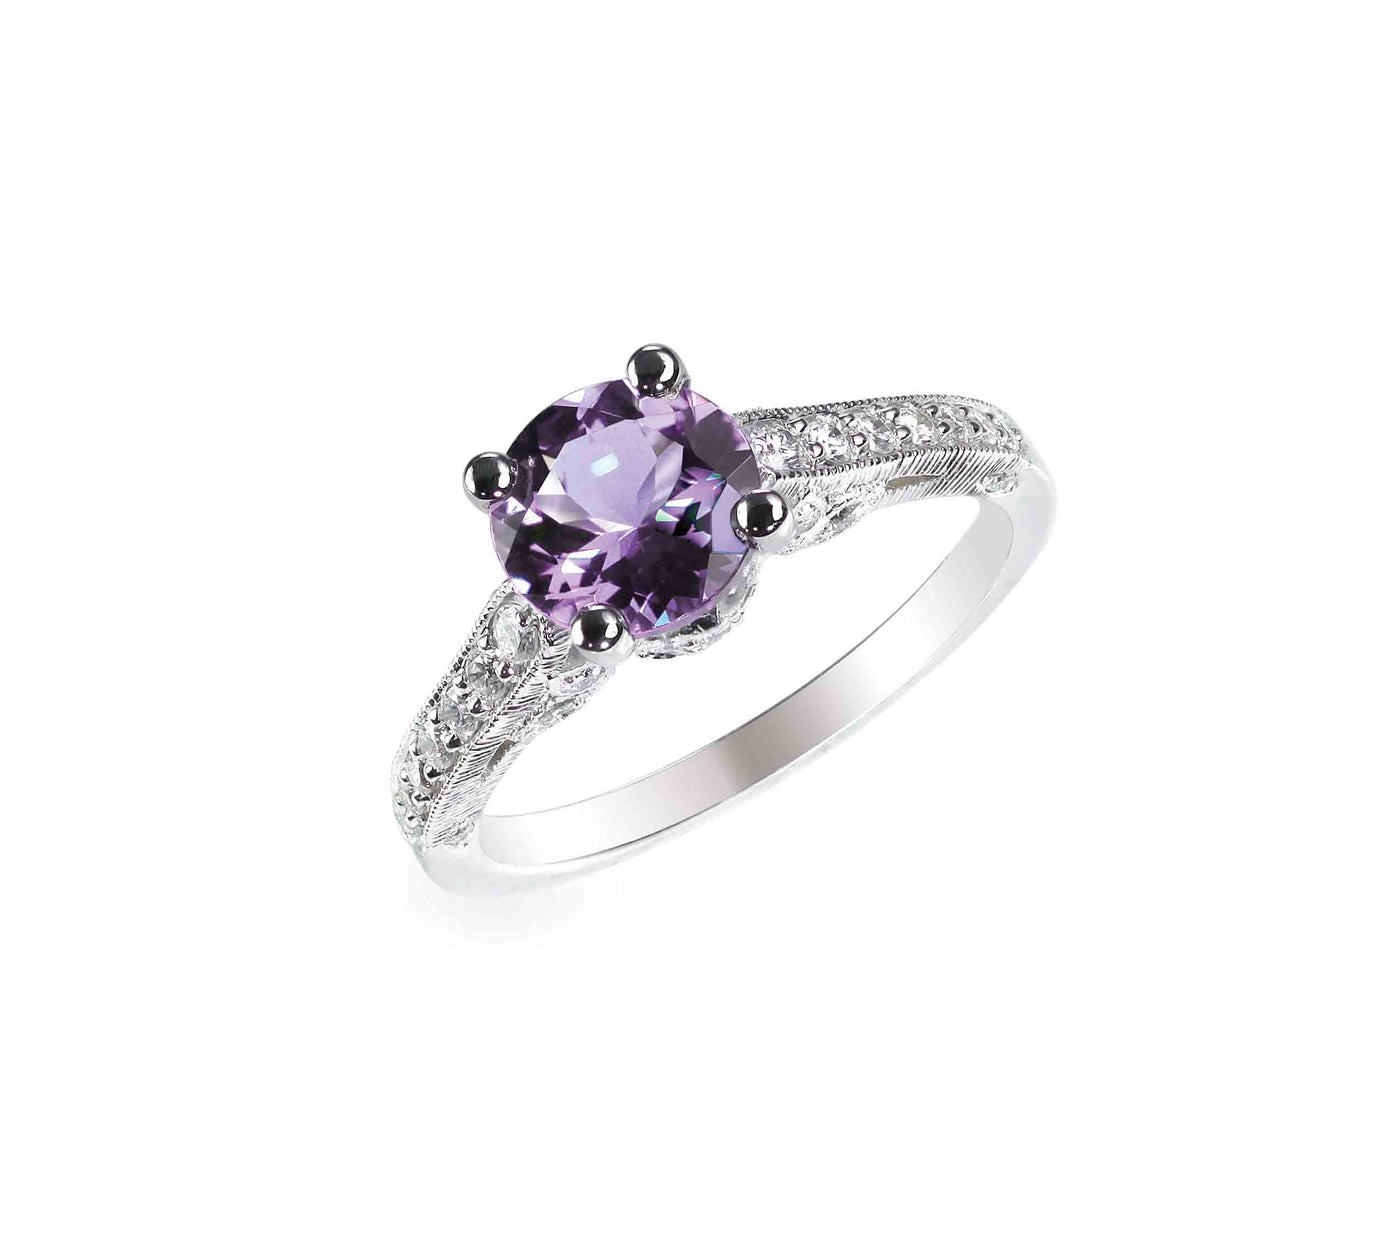 Tanzanite Ring, tanzanite gold ring, tanzanite engagement ring, tanzanite and diamond ring, tanzanite ring, gems and jewels